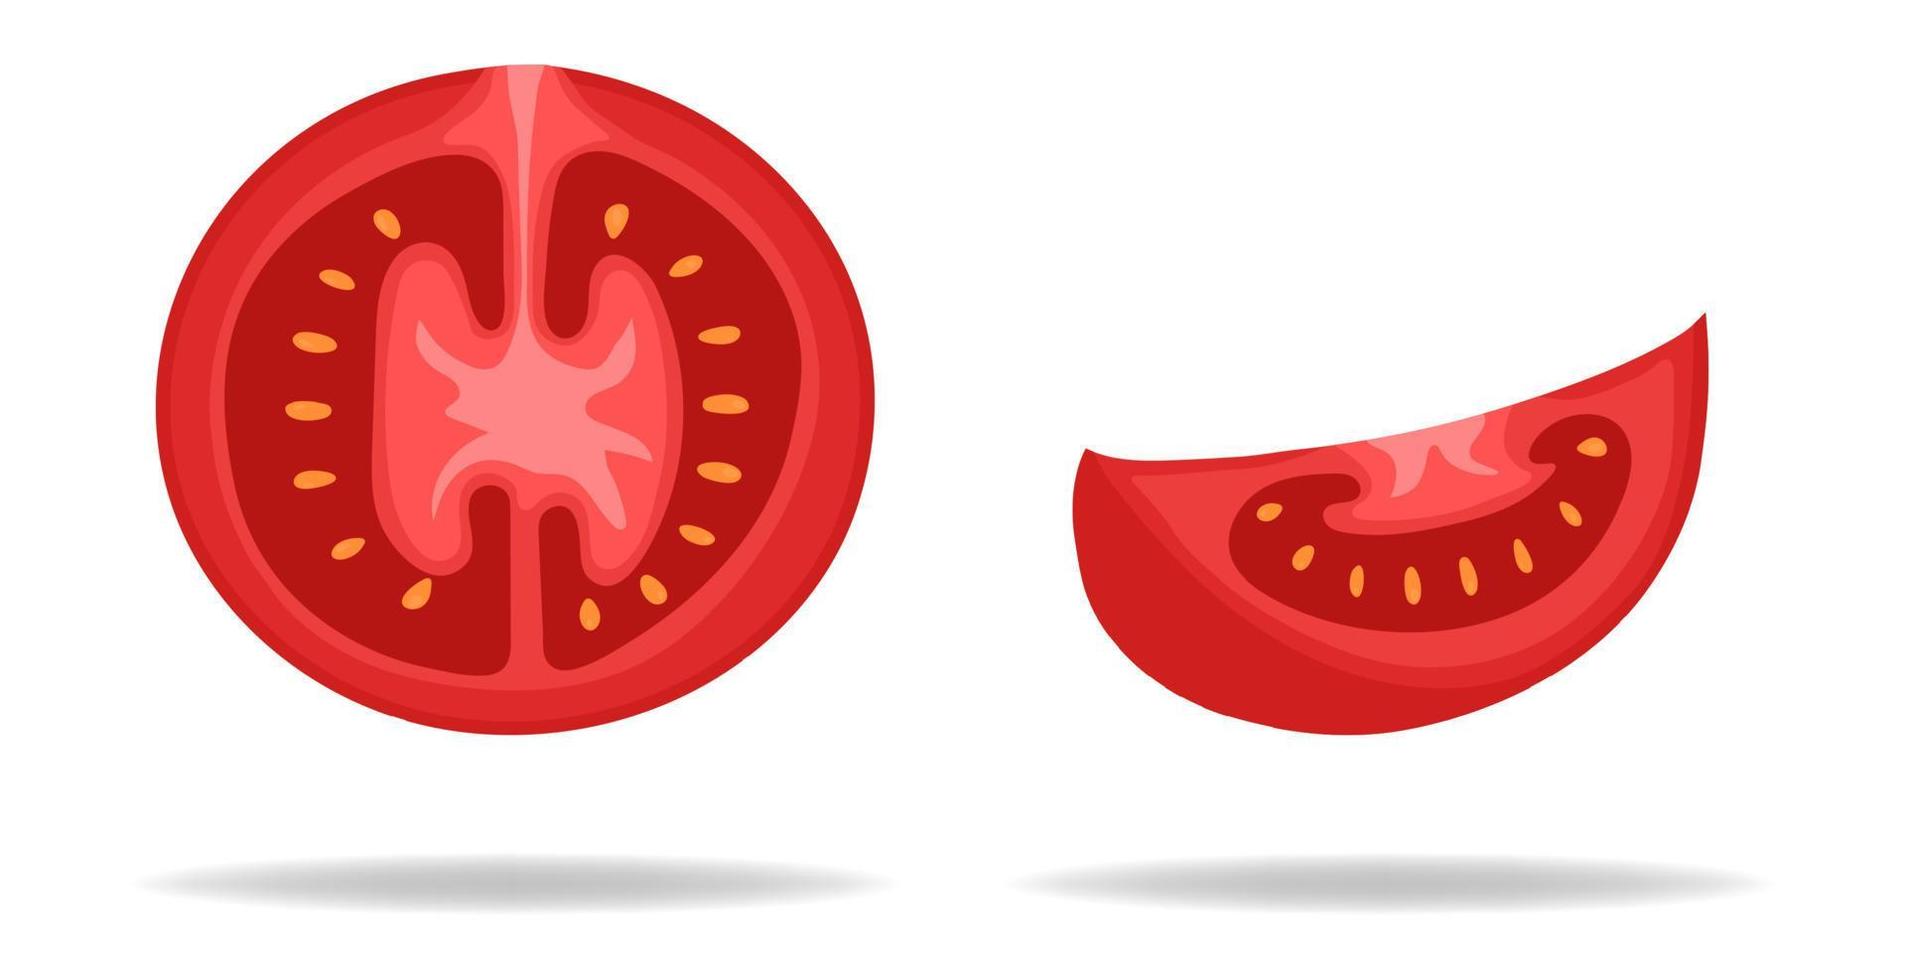 Fresh Red Tomato Half and Slice isolated on white background. Vegetable Icon for Market, Recipe Design. Organic Food. Cartoon Flat Style. Vector illustration for Your Design, Web.